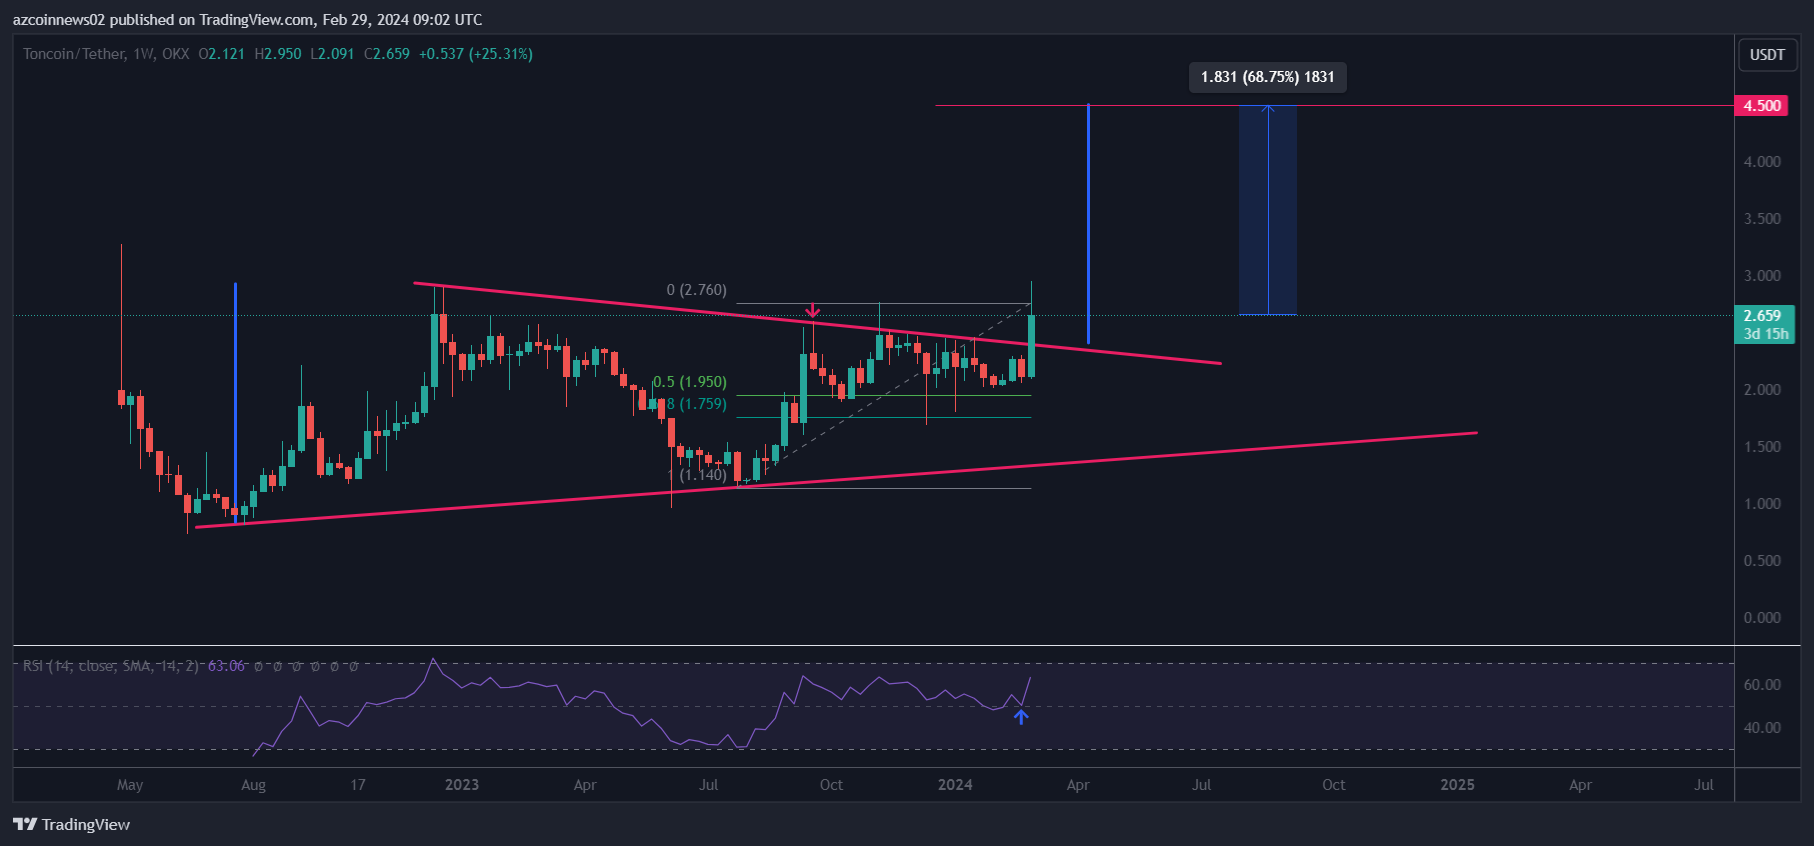 Details attract attention in toncoin price analysis